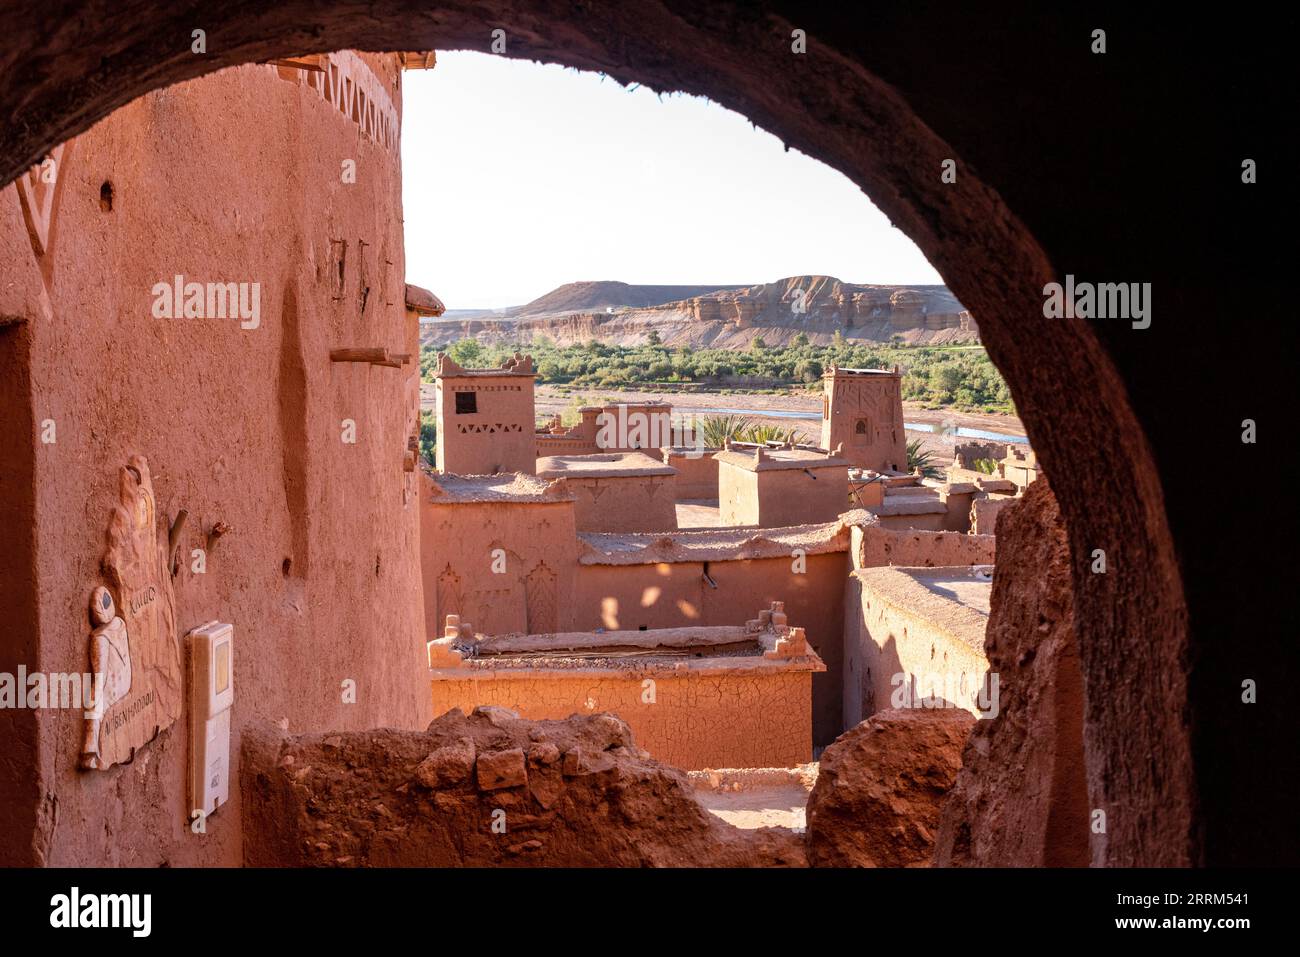 View through a passage on the roofs of historic old town Ait Ben Haddou, Morocco Stock Photo